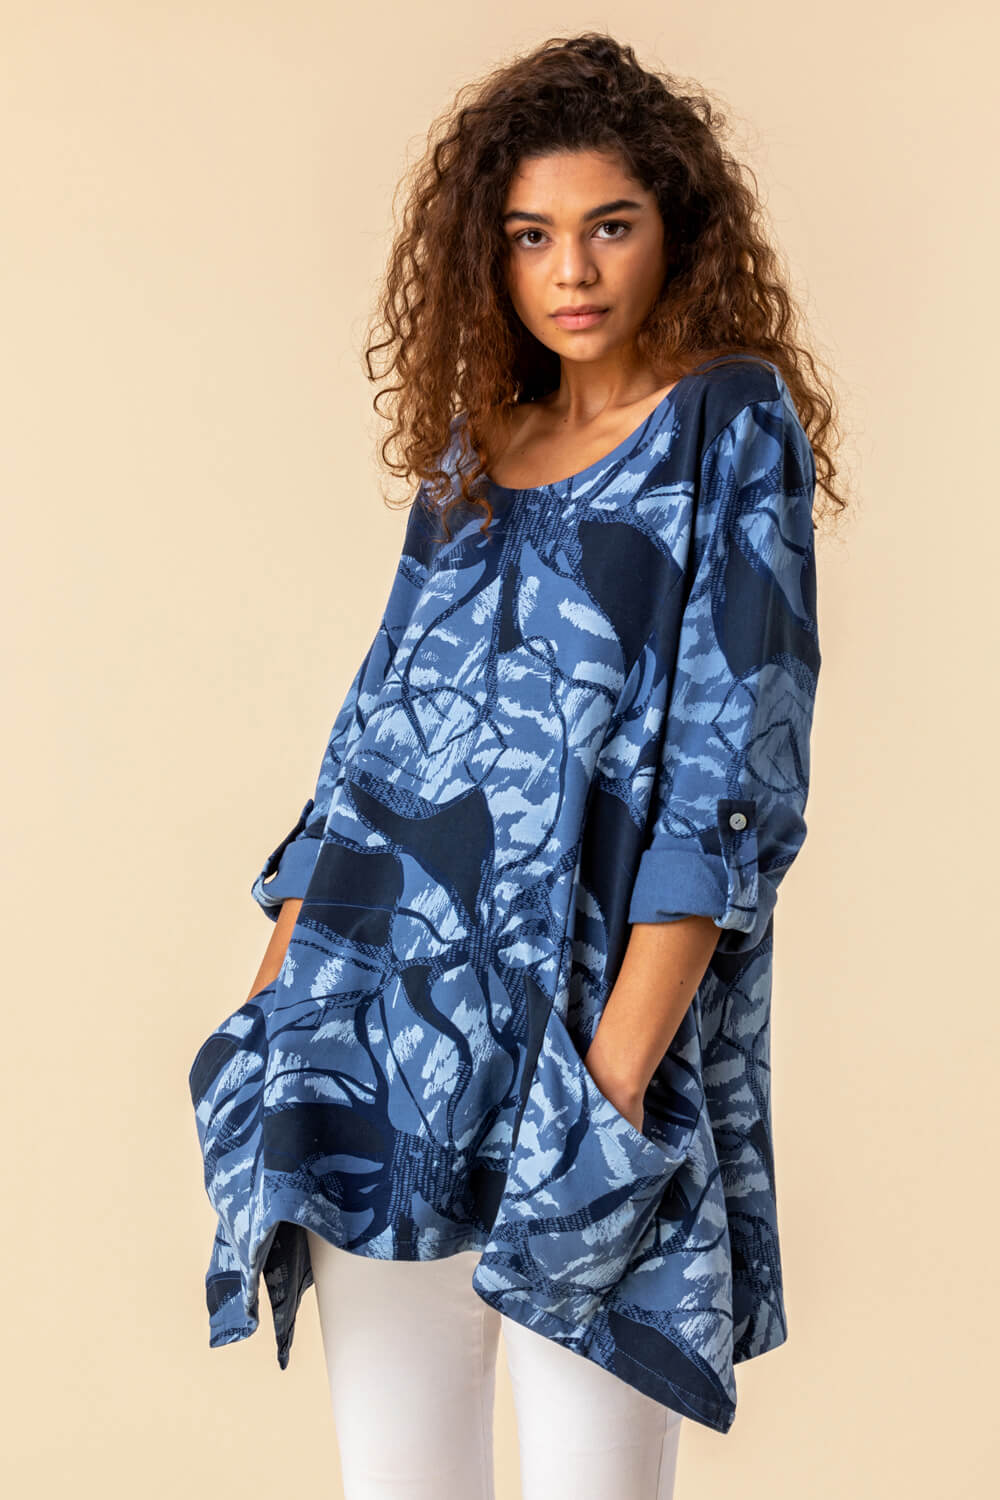 Denim Blue Abstract Print Tunic Top with Pockets, Image 3 of 4